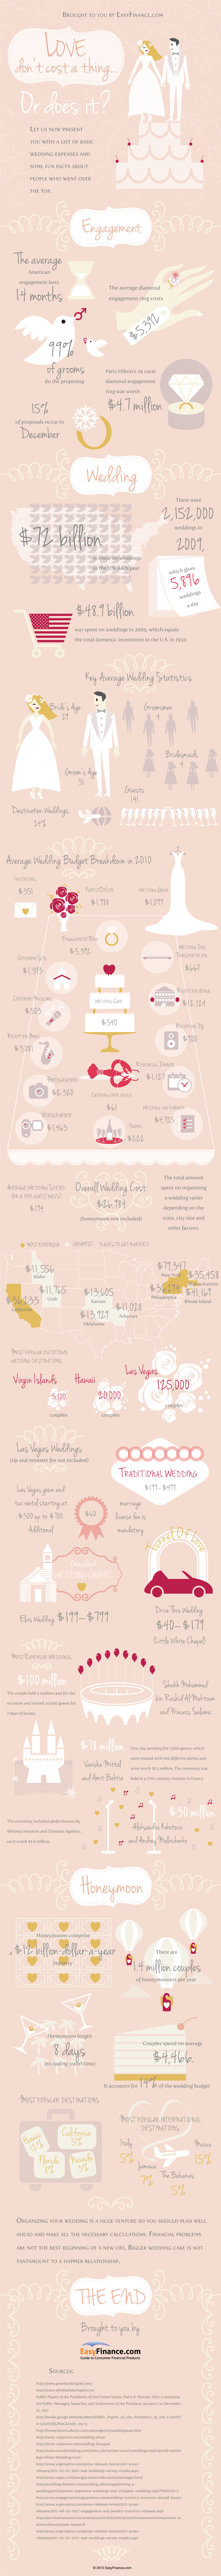 Love Don't Cost a Thing. Or Does It? (Infographic) 